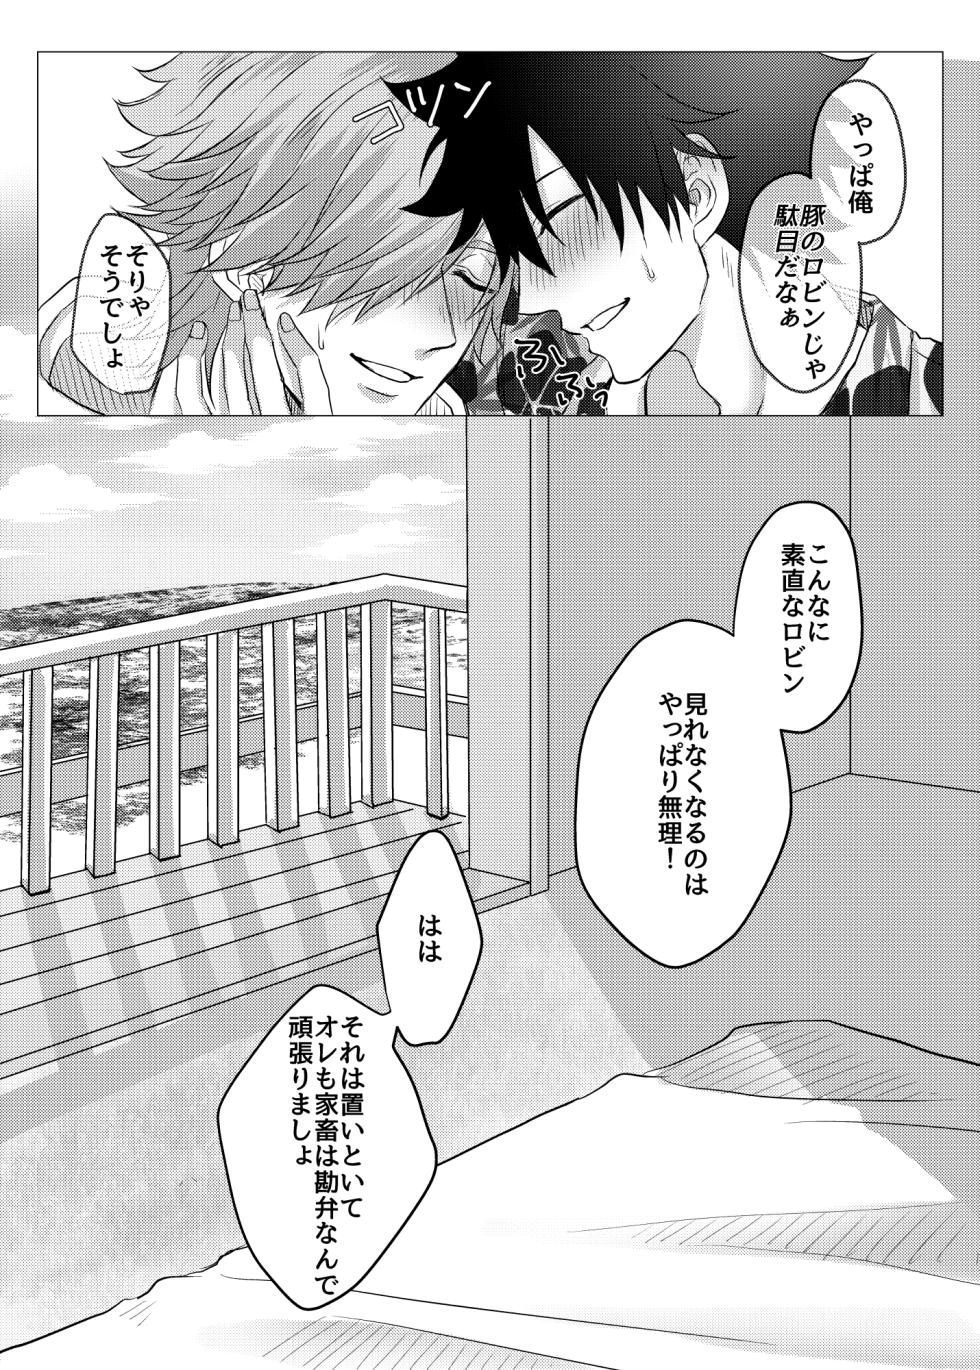 [about (No. 6)] Luluhawa Onii-san to Issho♥ (Fate/Grand Order) [Digital] - Page 22